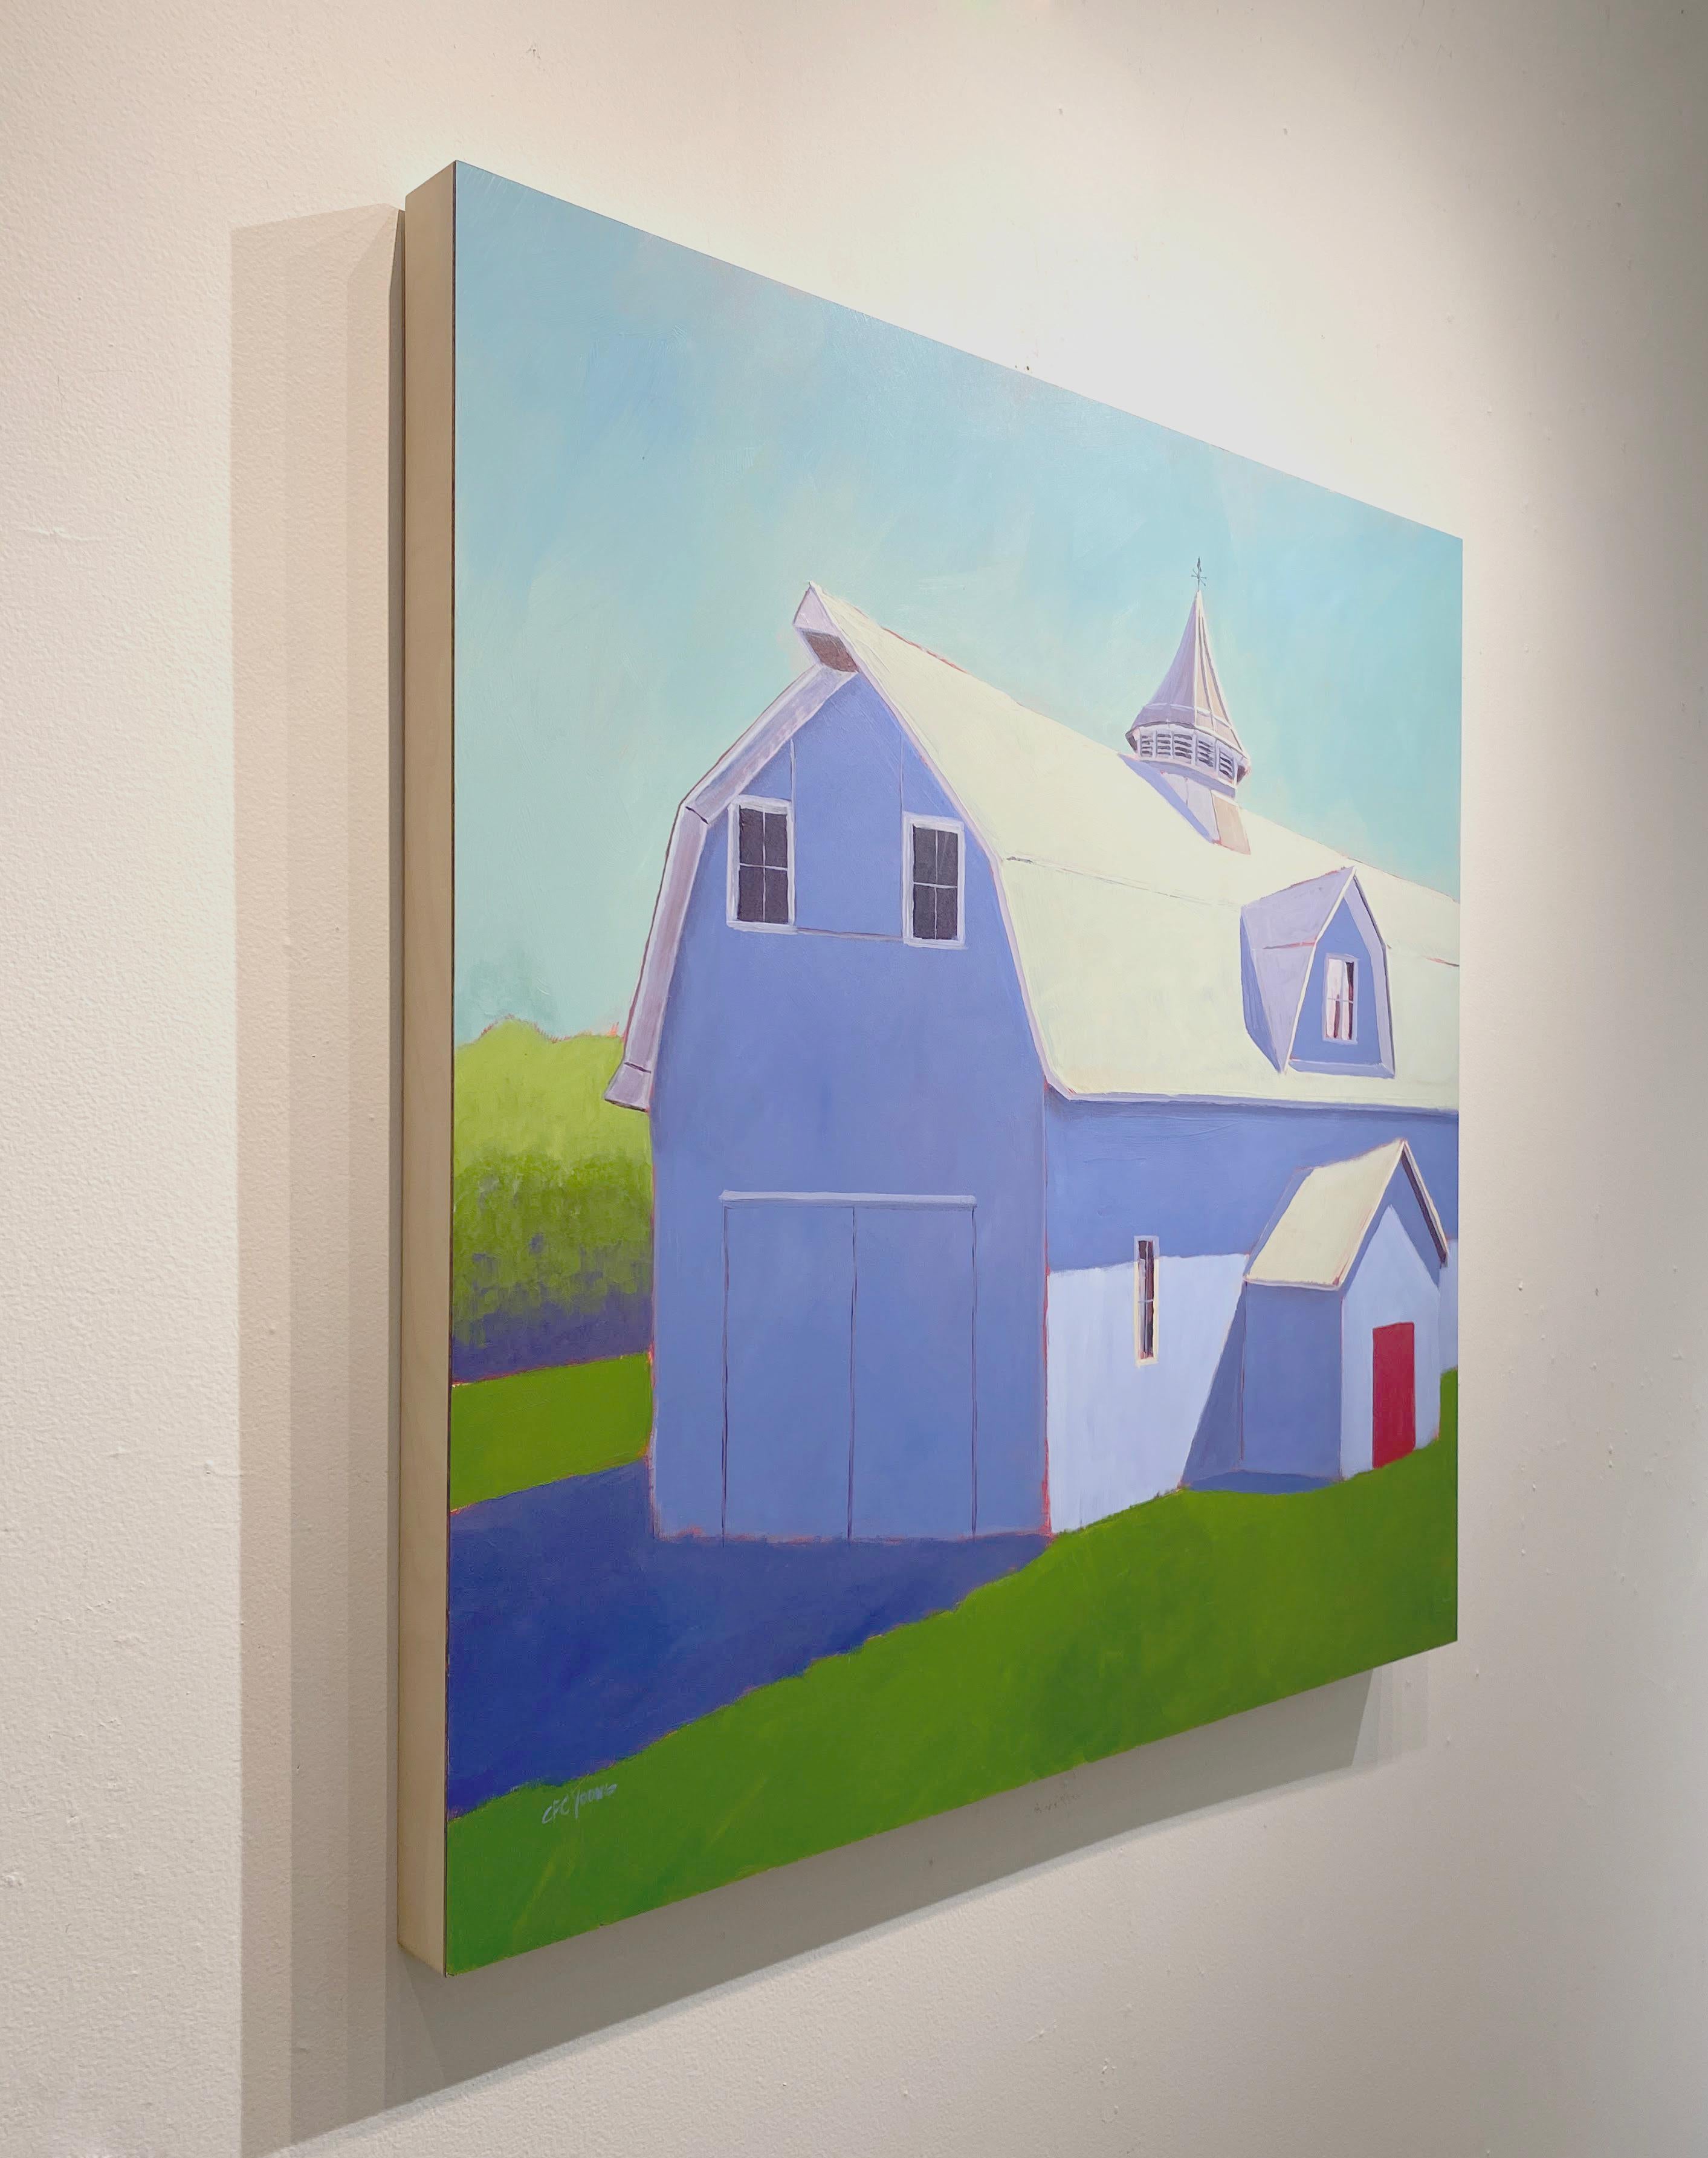 This contemporary landscape painting, “Blueberry Barn” by artist Carol Young is a 36x36 original acrylic painting on a natural wood panel.  This painting depicts a blue structure with a red door in a green rural setting with a teal blue sky.

Like